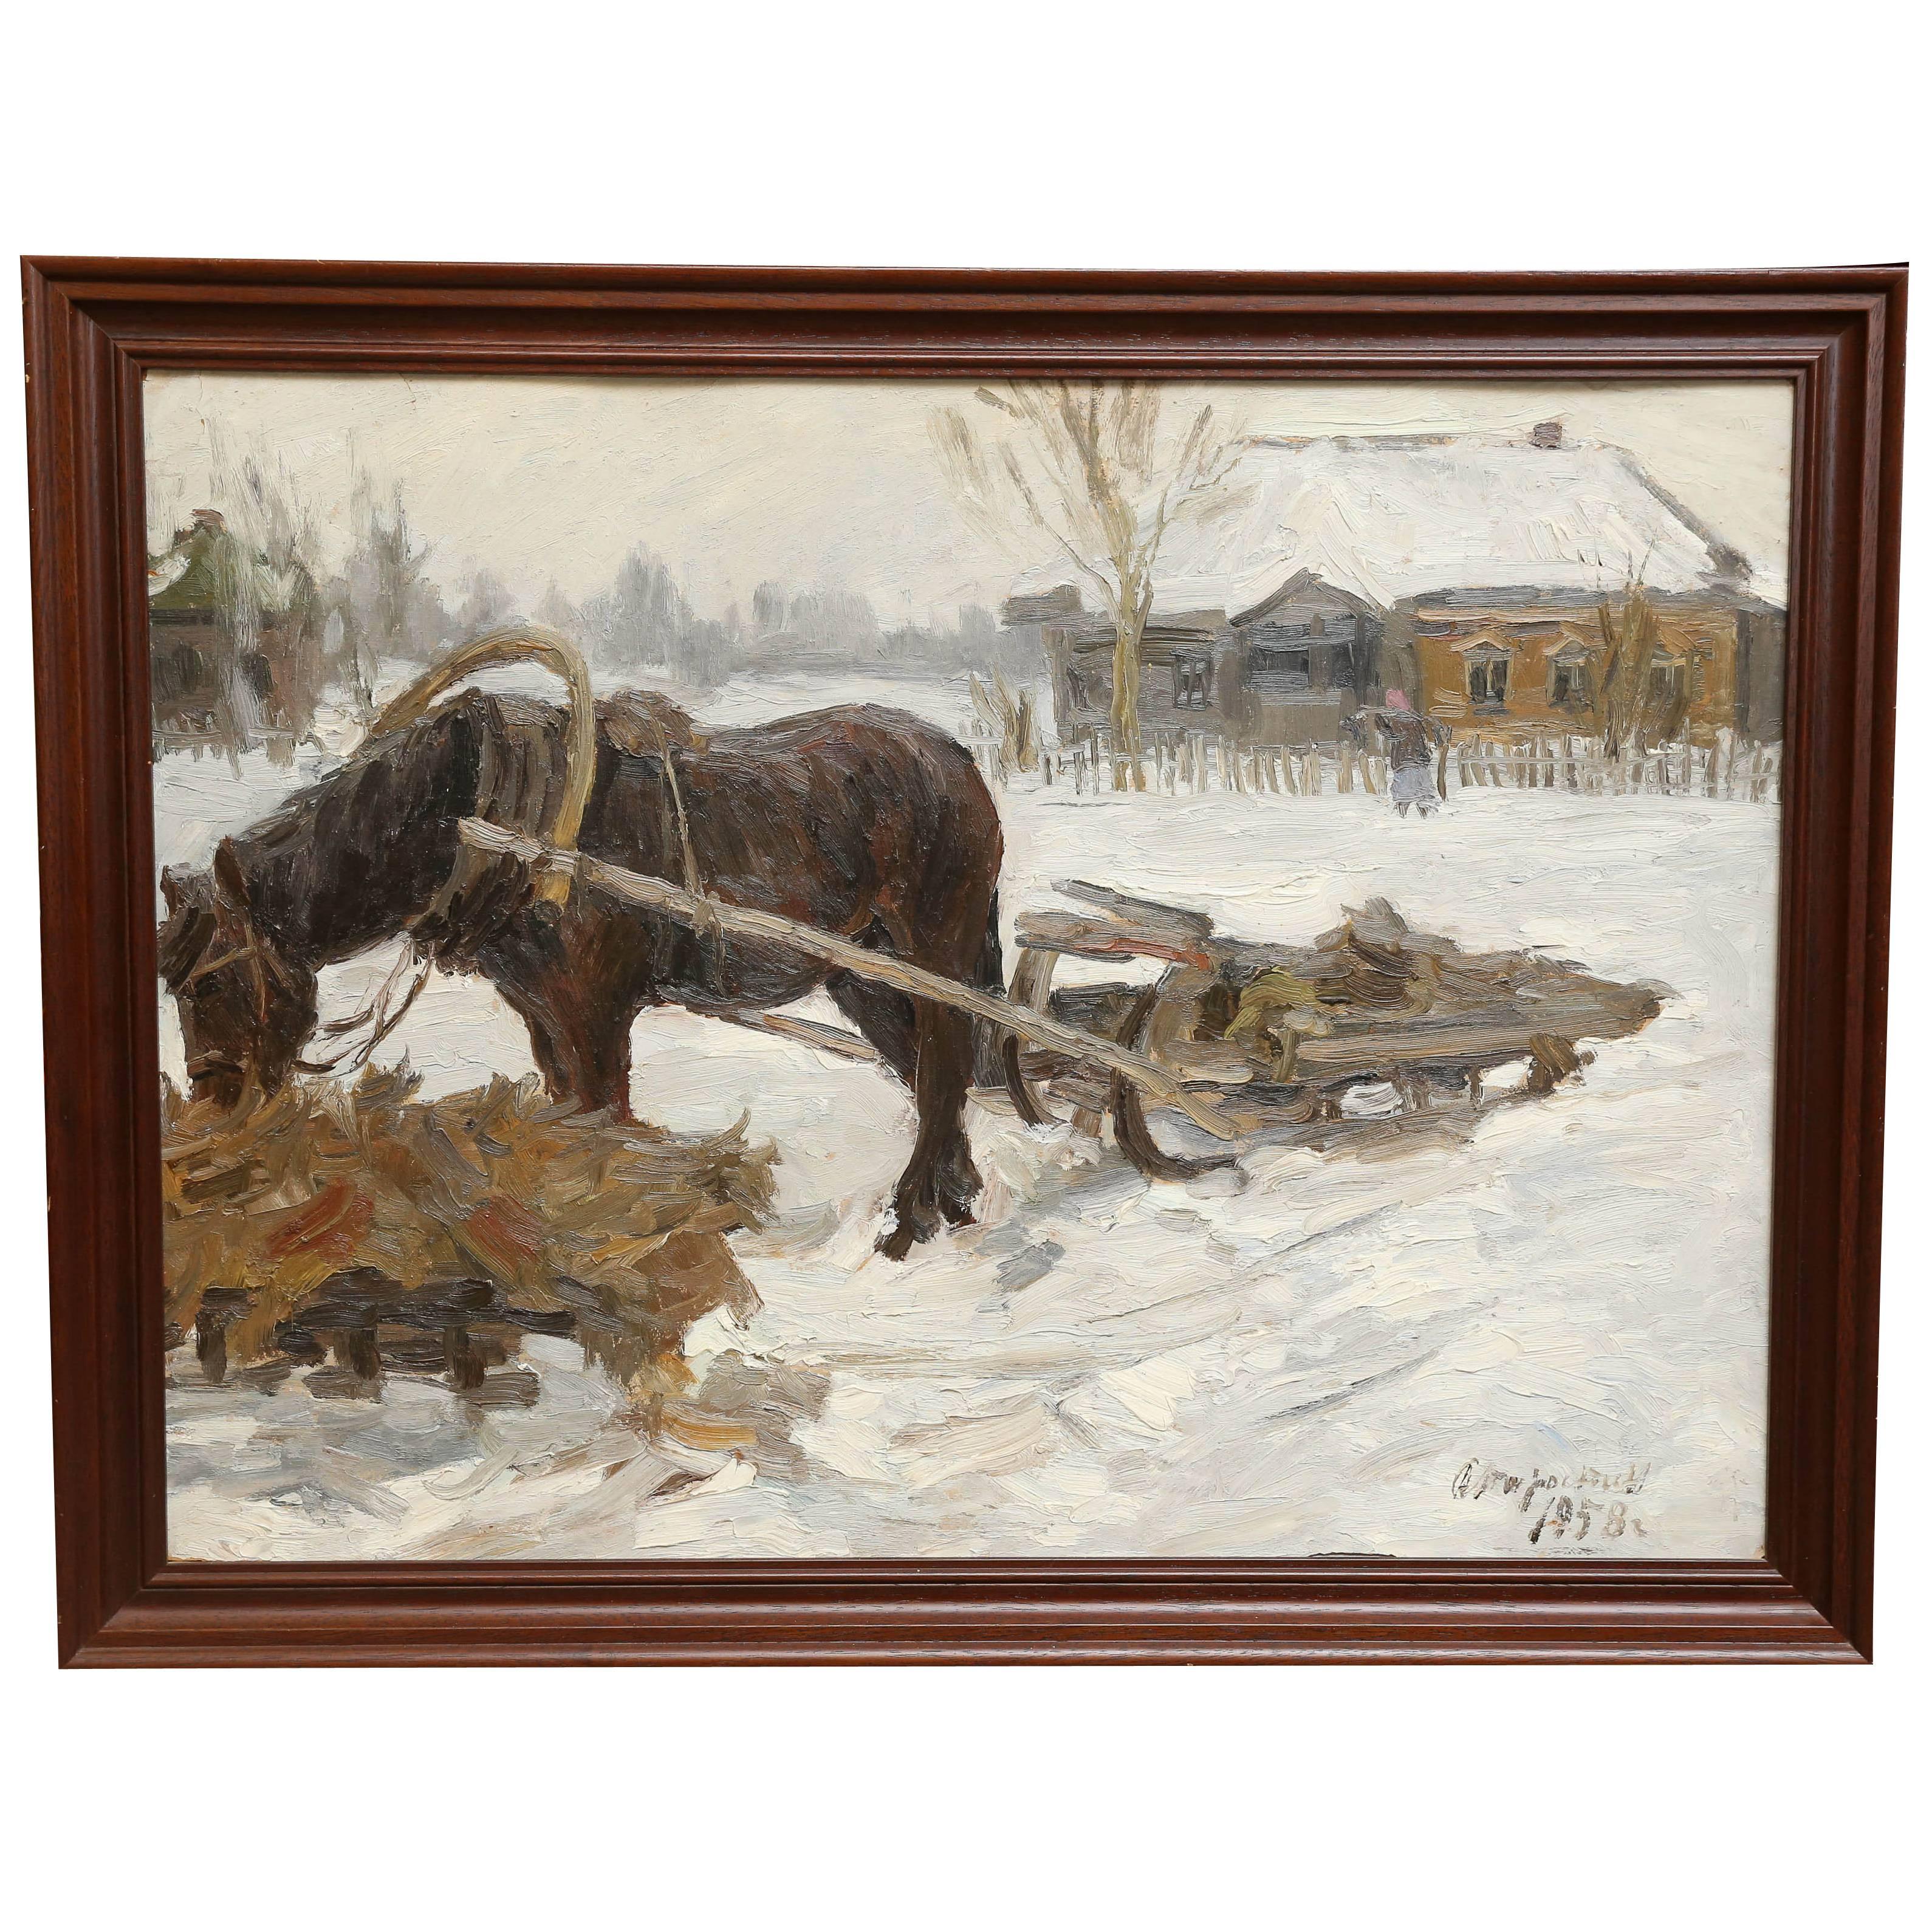 Starostin, Aleksey Mihaylovich Painting, "Winter. Horse is tired"